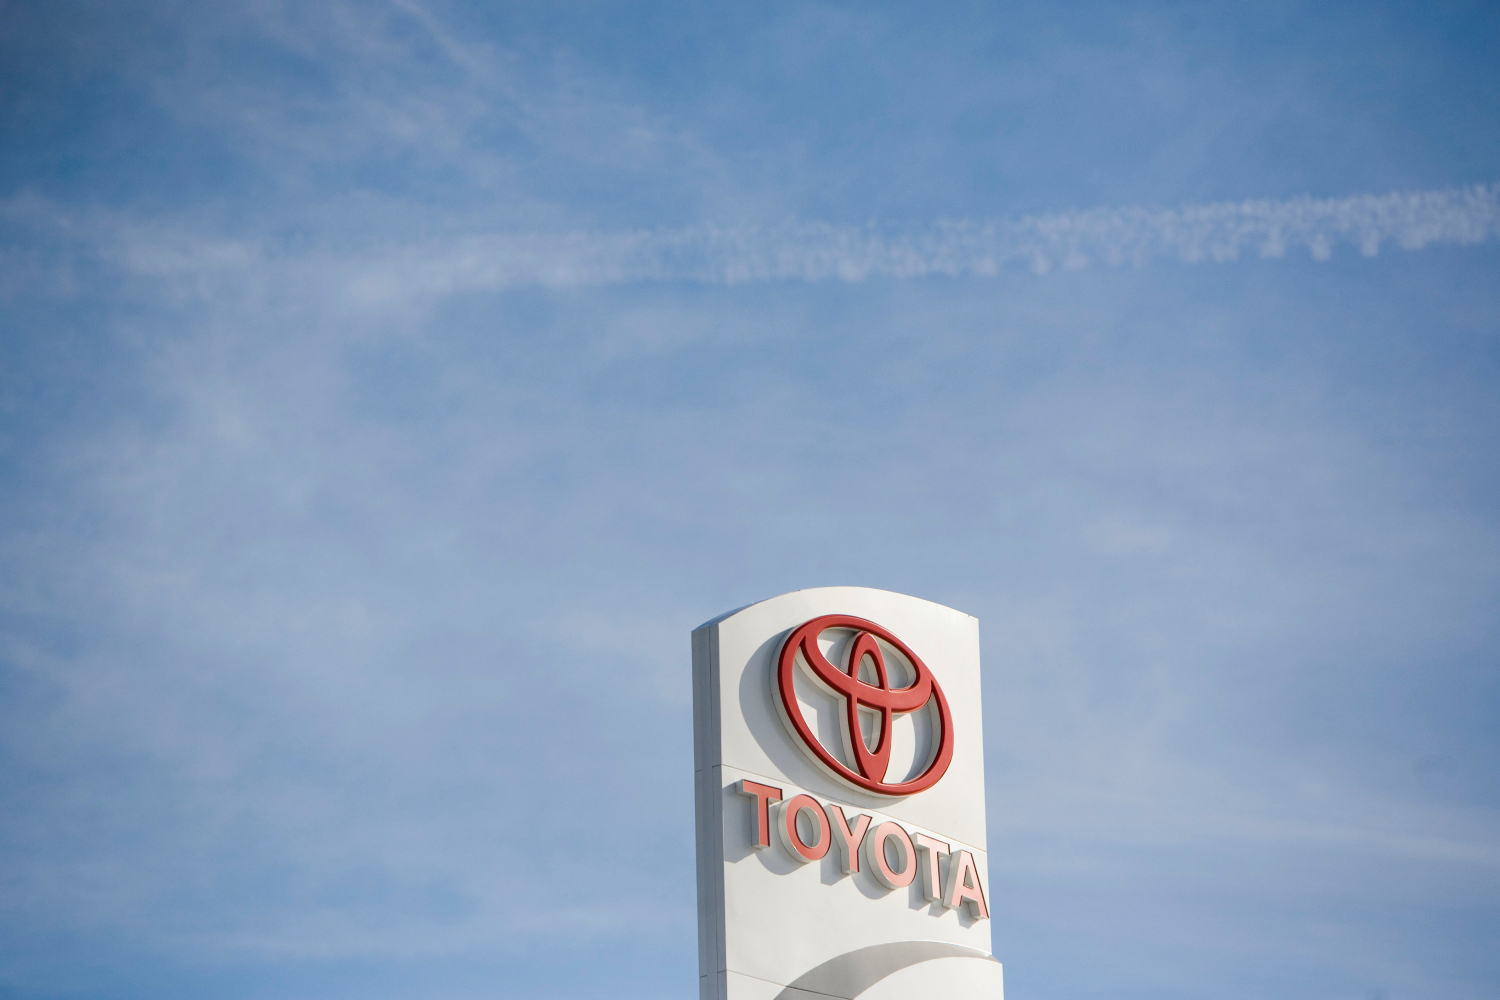 A Toyota used car dealership owner was convicted in a $4.3 million fraud case